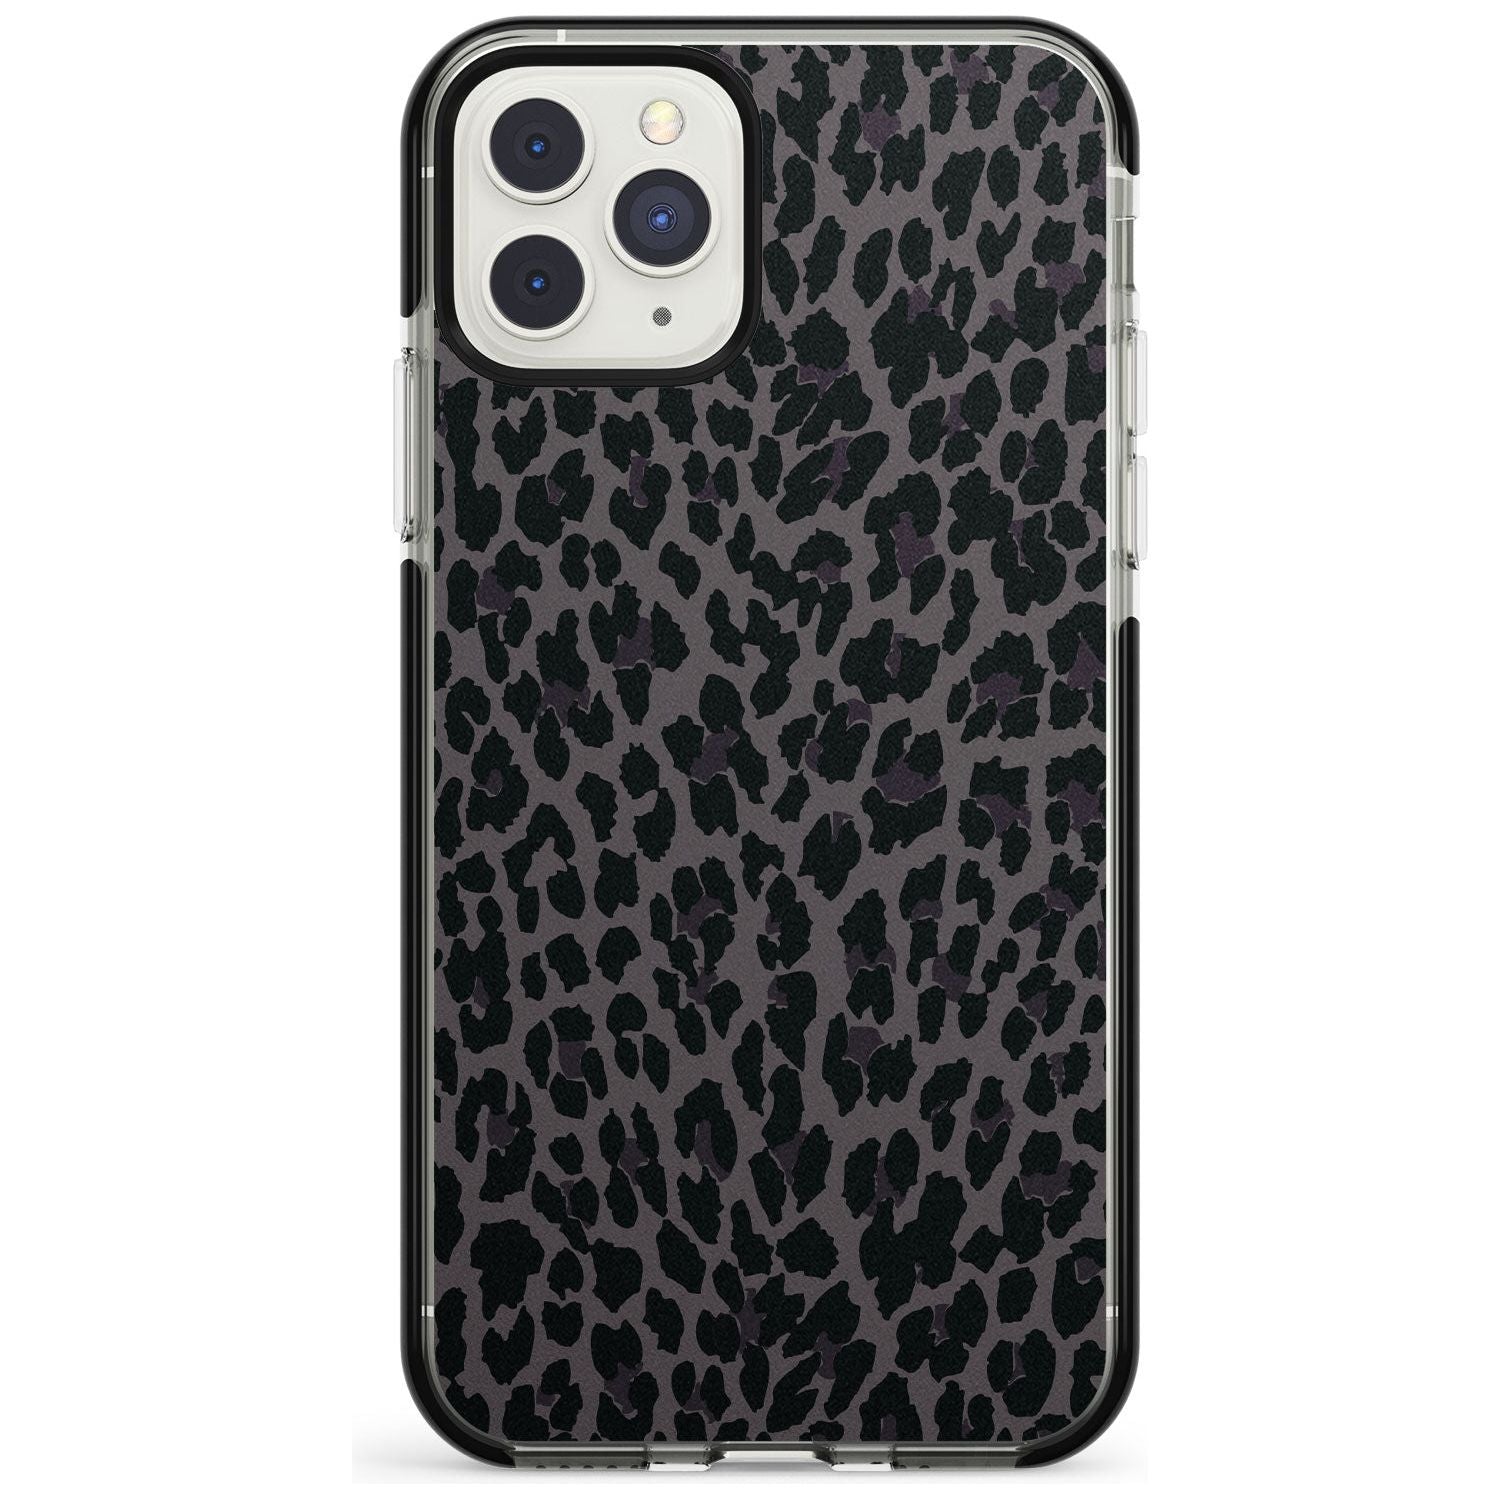 Dark Animal Print Pattern Small Leopard Black Impact Phone Case for iPhone 11 Pro Max